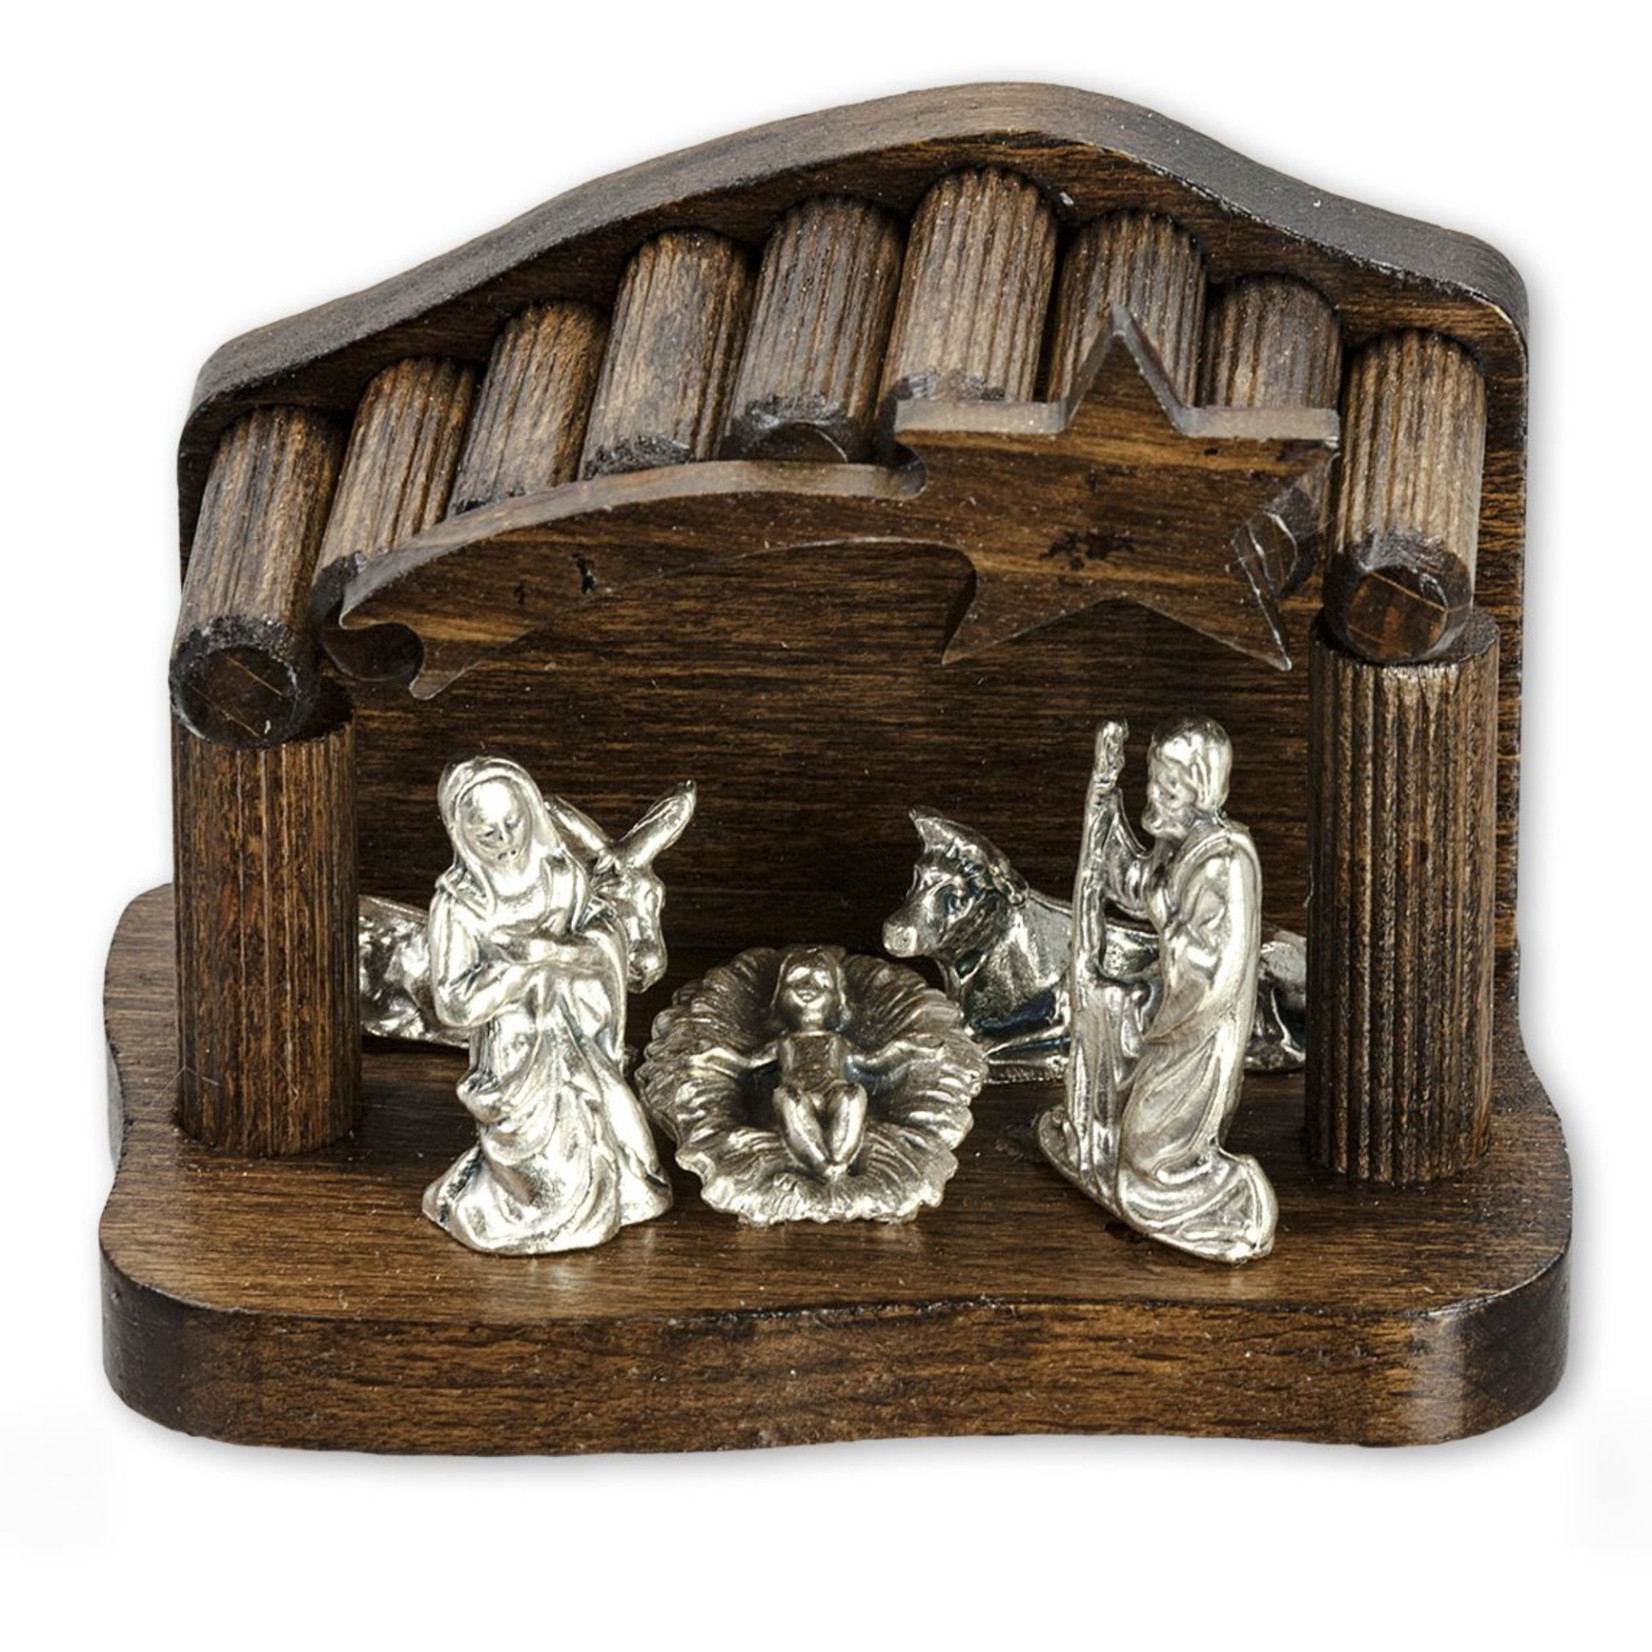 Dark Wood and Pewter Nativity with Small Pegs